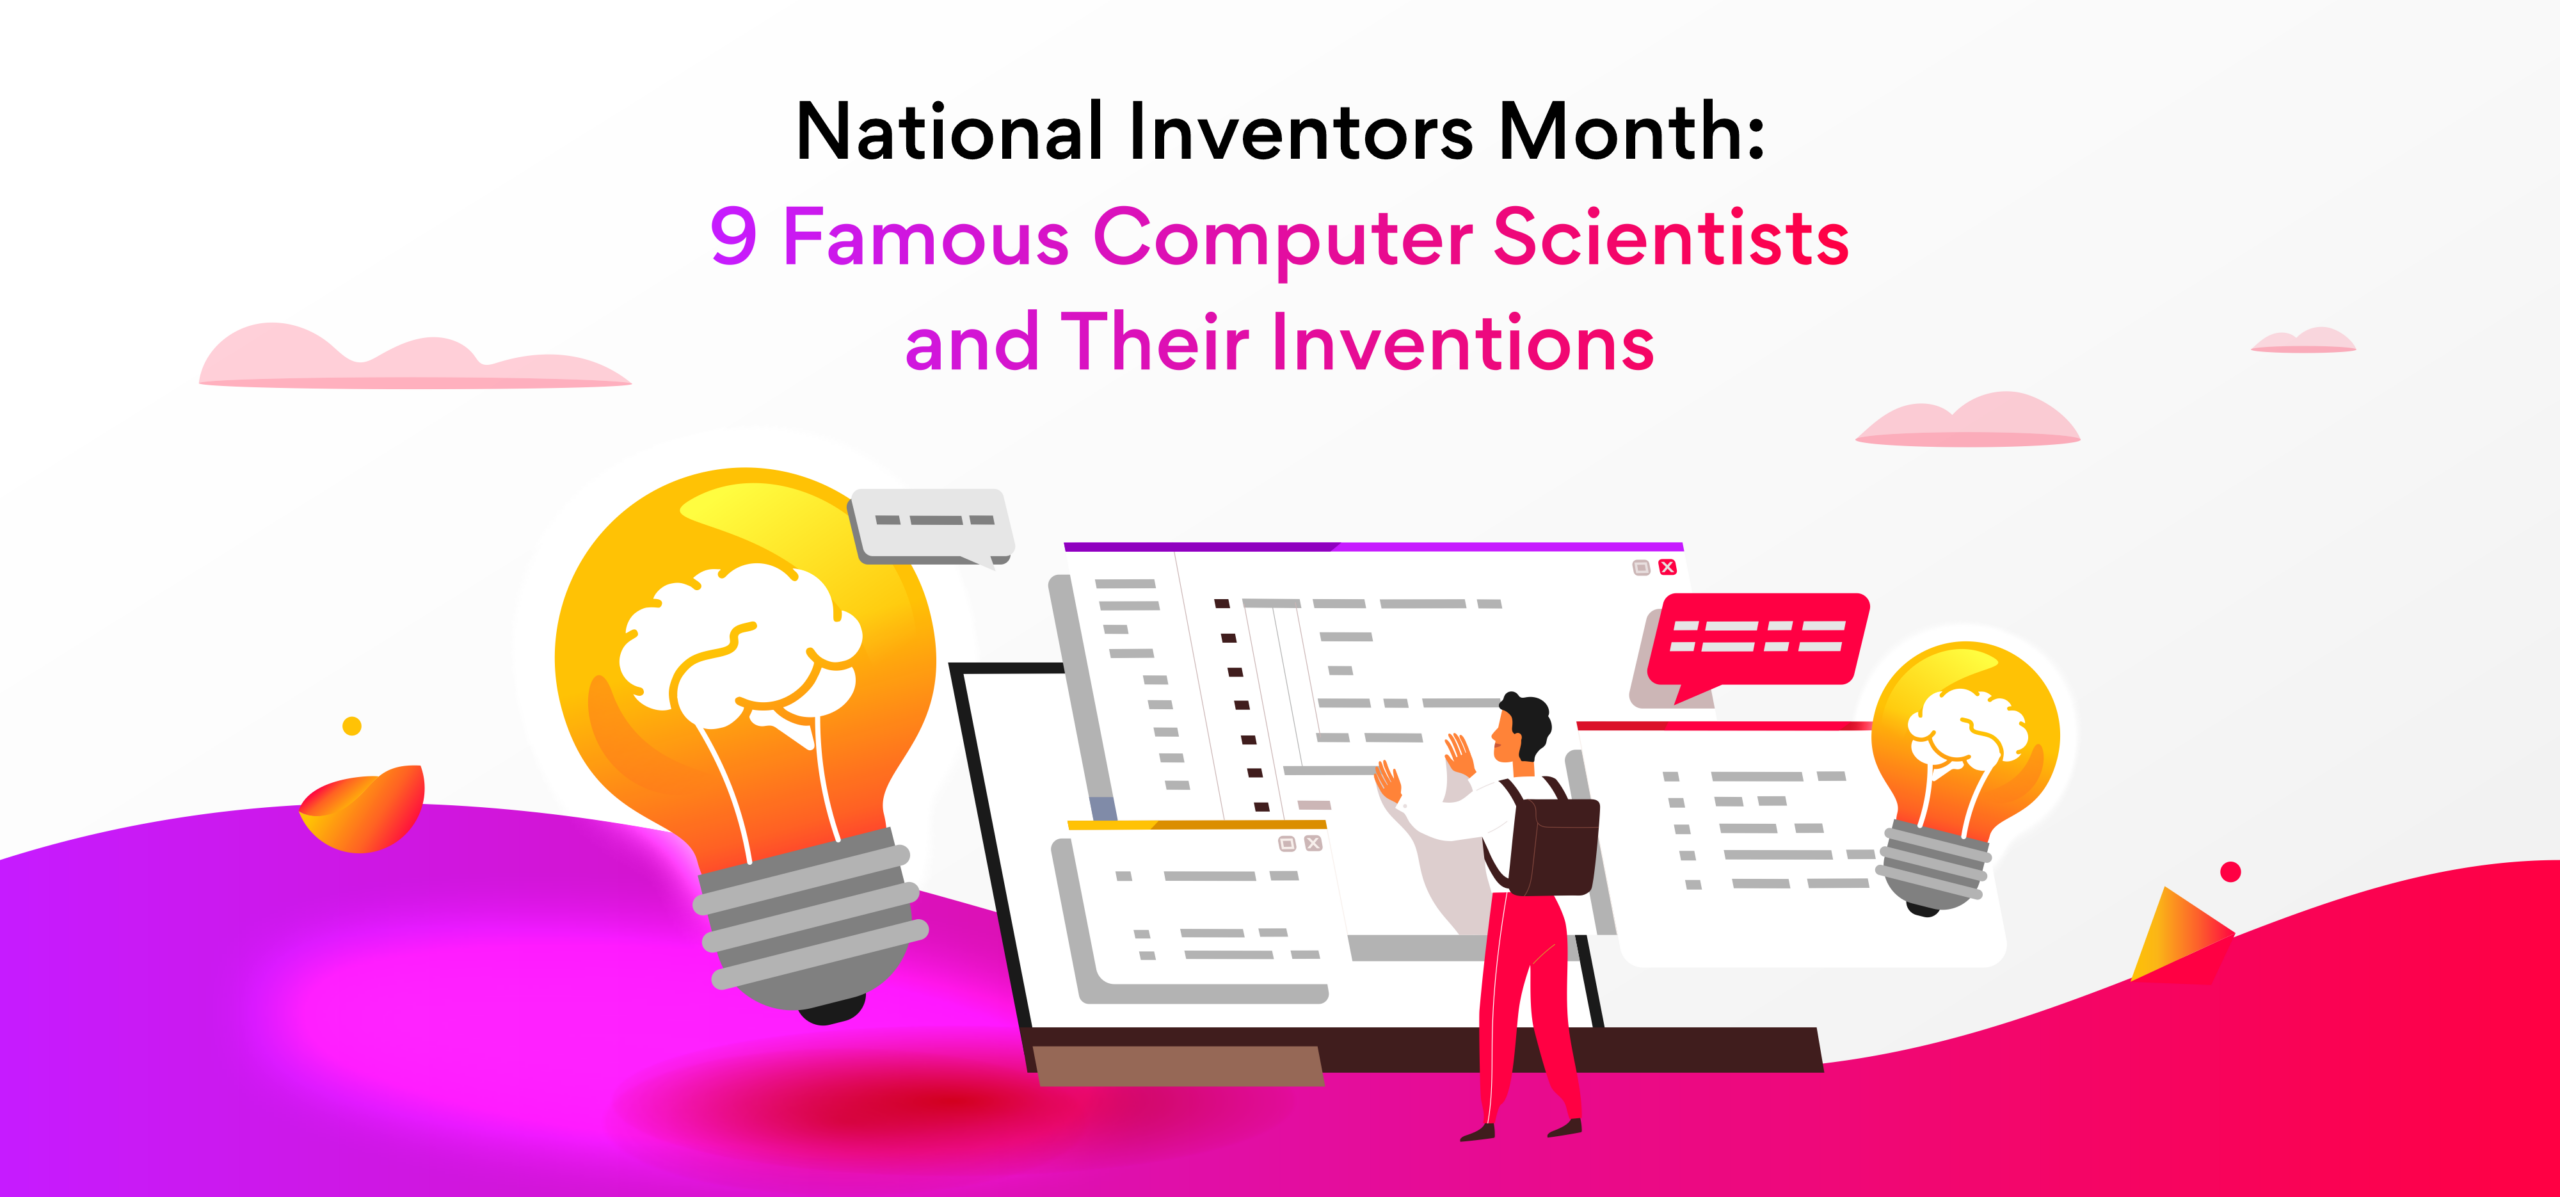 Famous computer scientists and their inventions